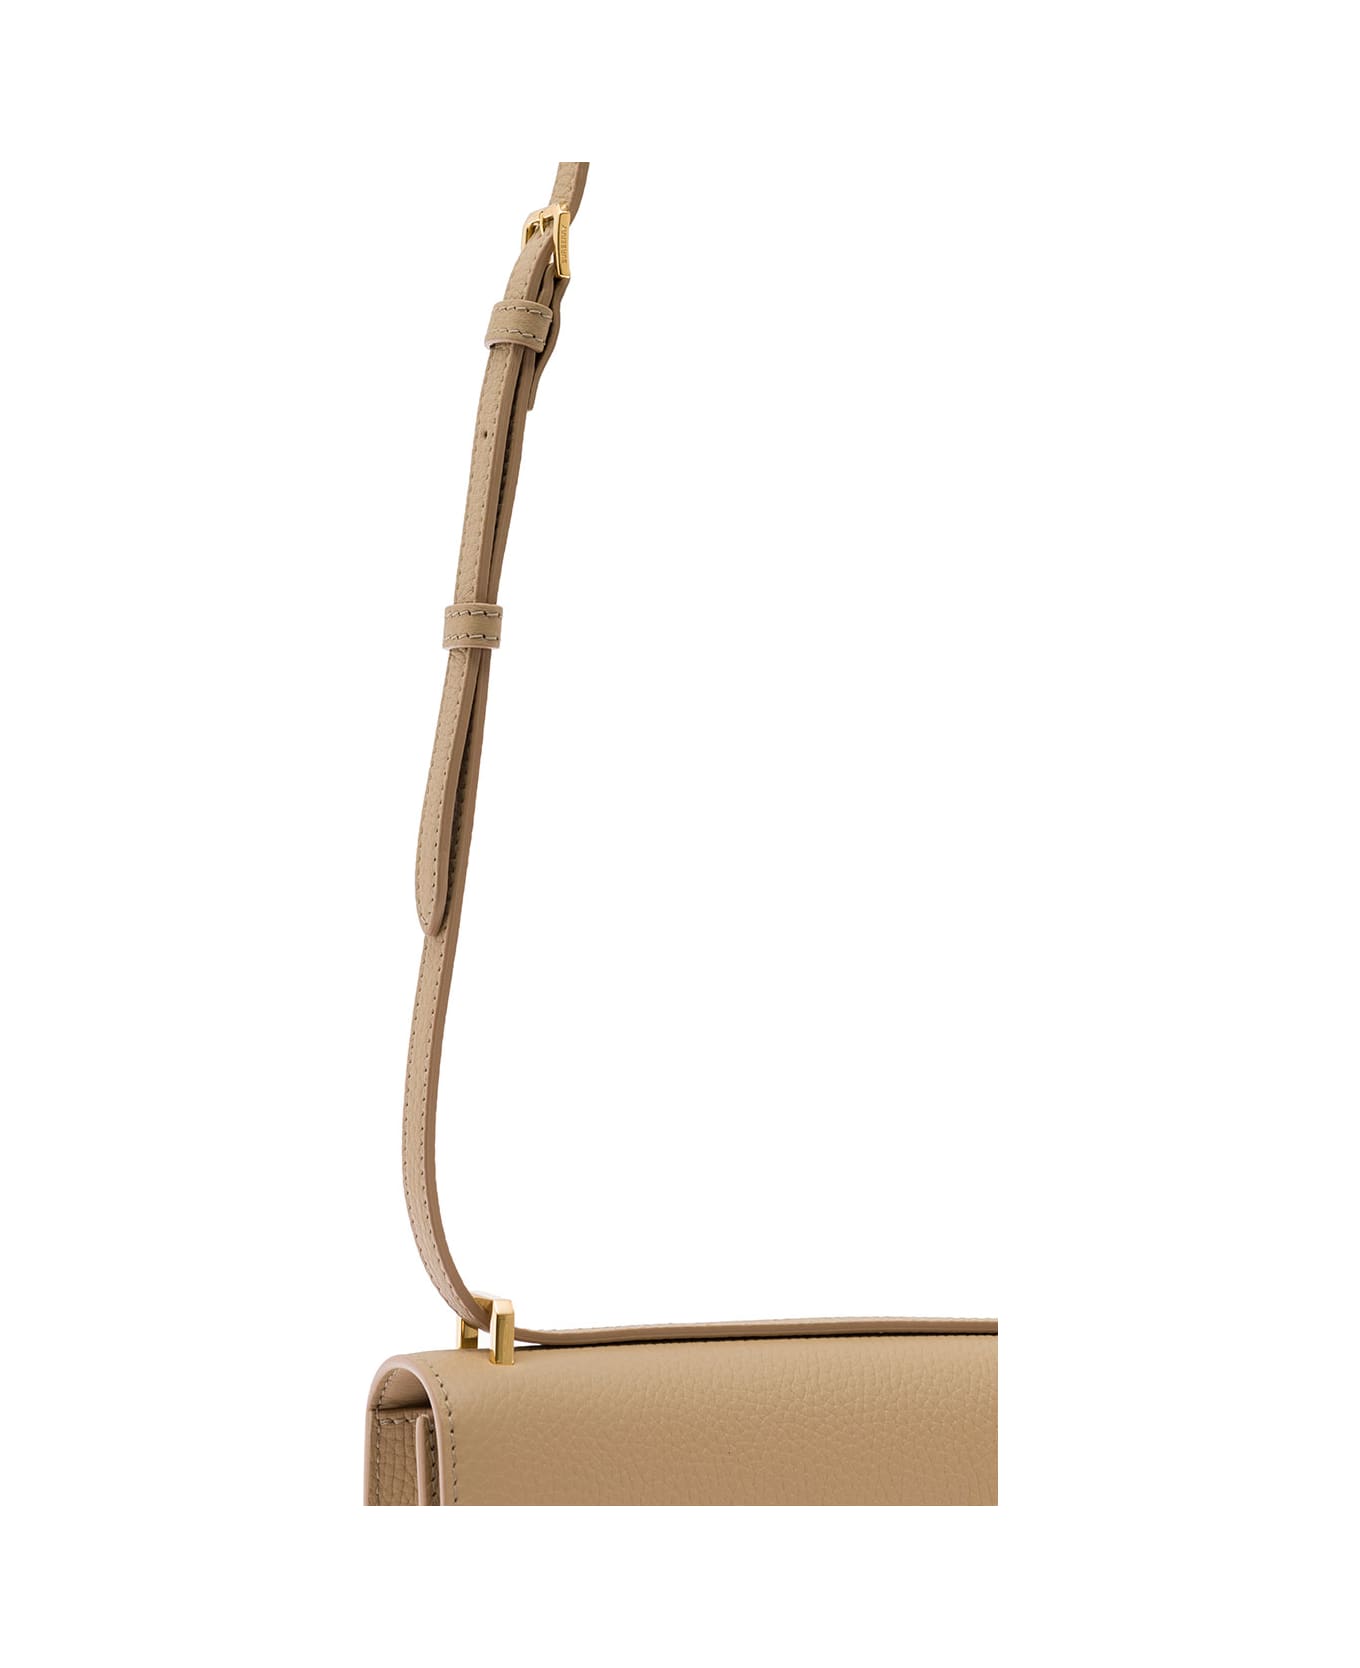 Burberry Beige Shoulder Bag With Tonal Tb Logo In Grainy Leather Woman - Nude & Neutrals ショルダーバッグ